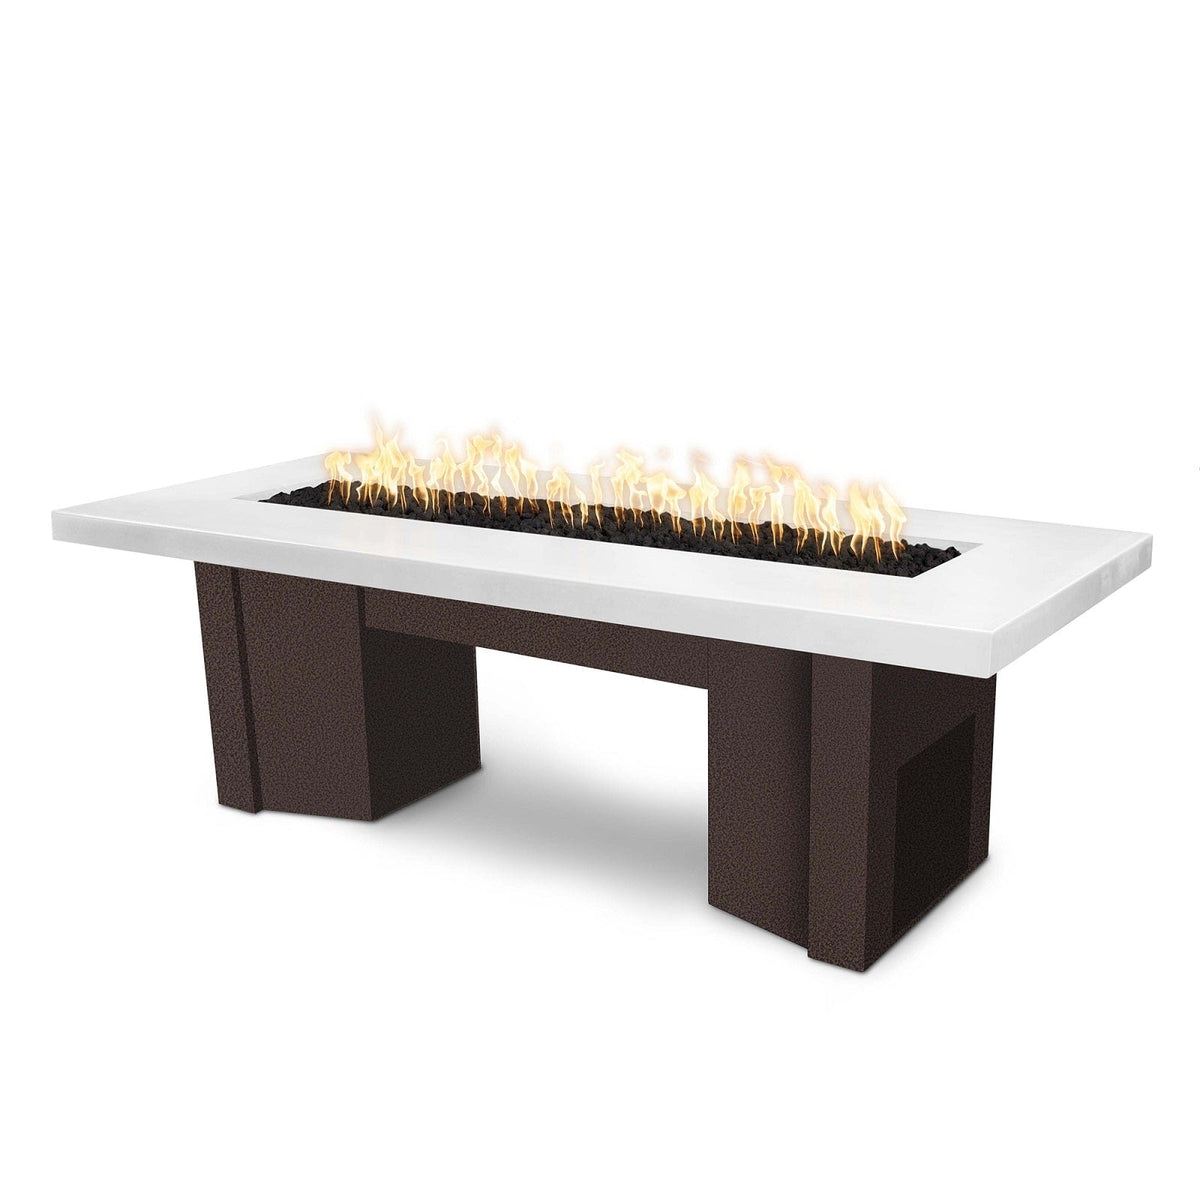 The Outdoor Plus Fire Features Limestone (-LIM) / Copper Vein Powder Coated Steel (-CPV) The Outdoor Plus 60&quot; Alameda Fire Table Smooth Concrete in Natural Gas - Match Lit with Flame Sense System / OPT-ALMGFRC60FSML-NG